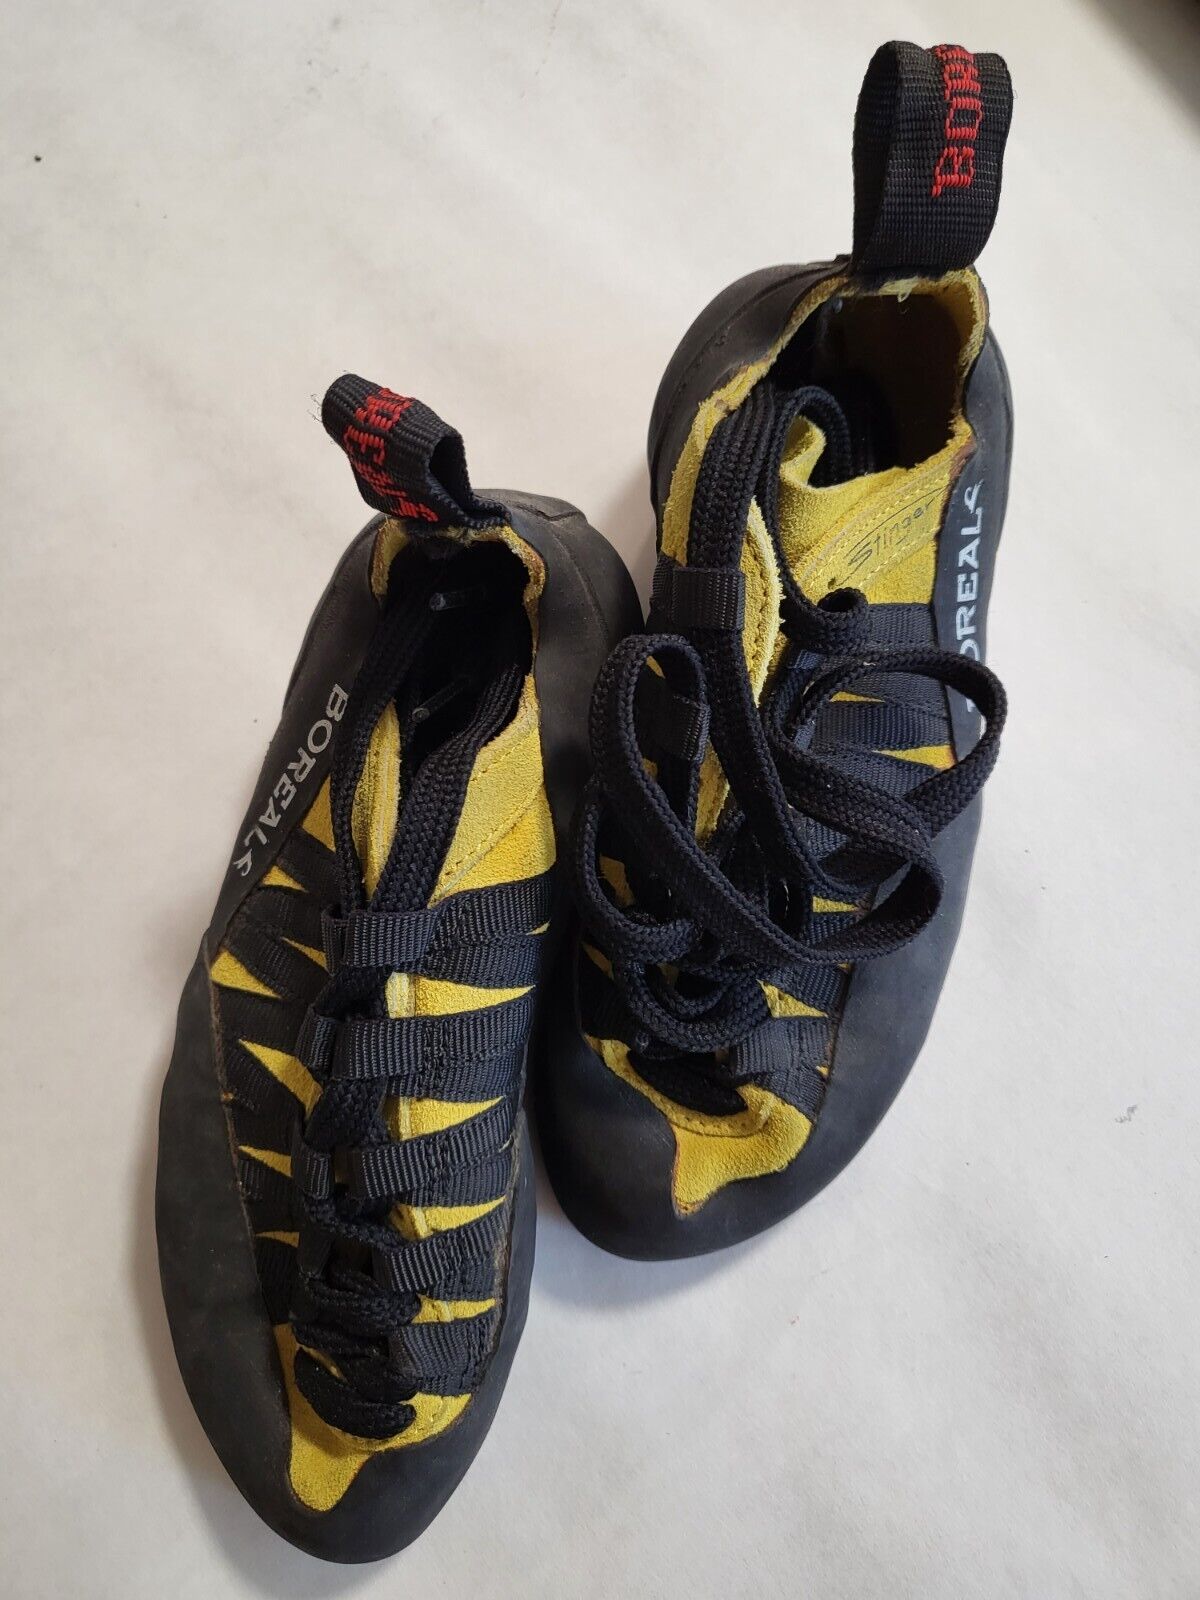 Boreal Stinger Climbing Shoes Size 5 (new Condition)